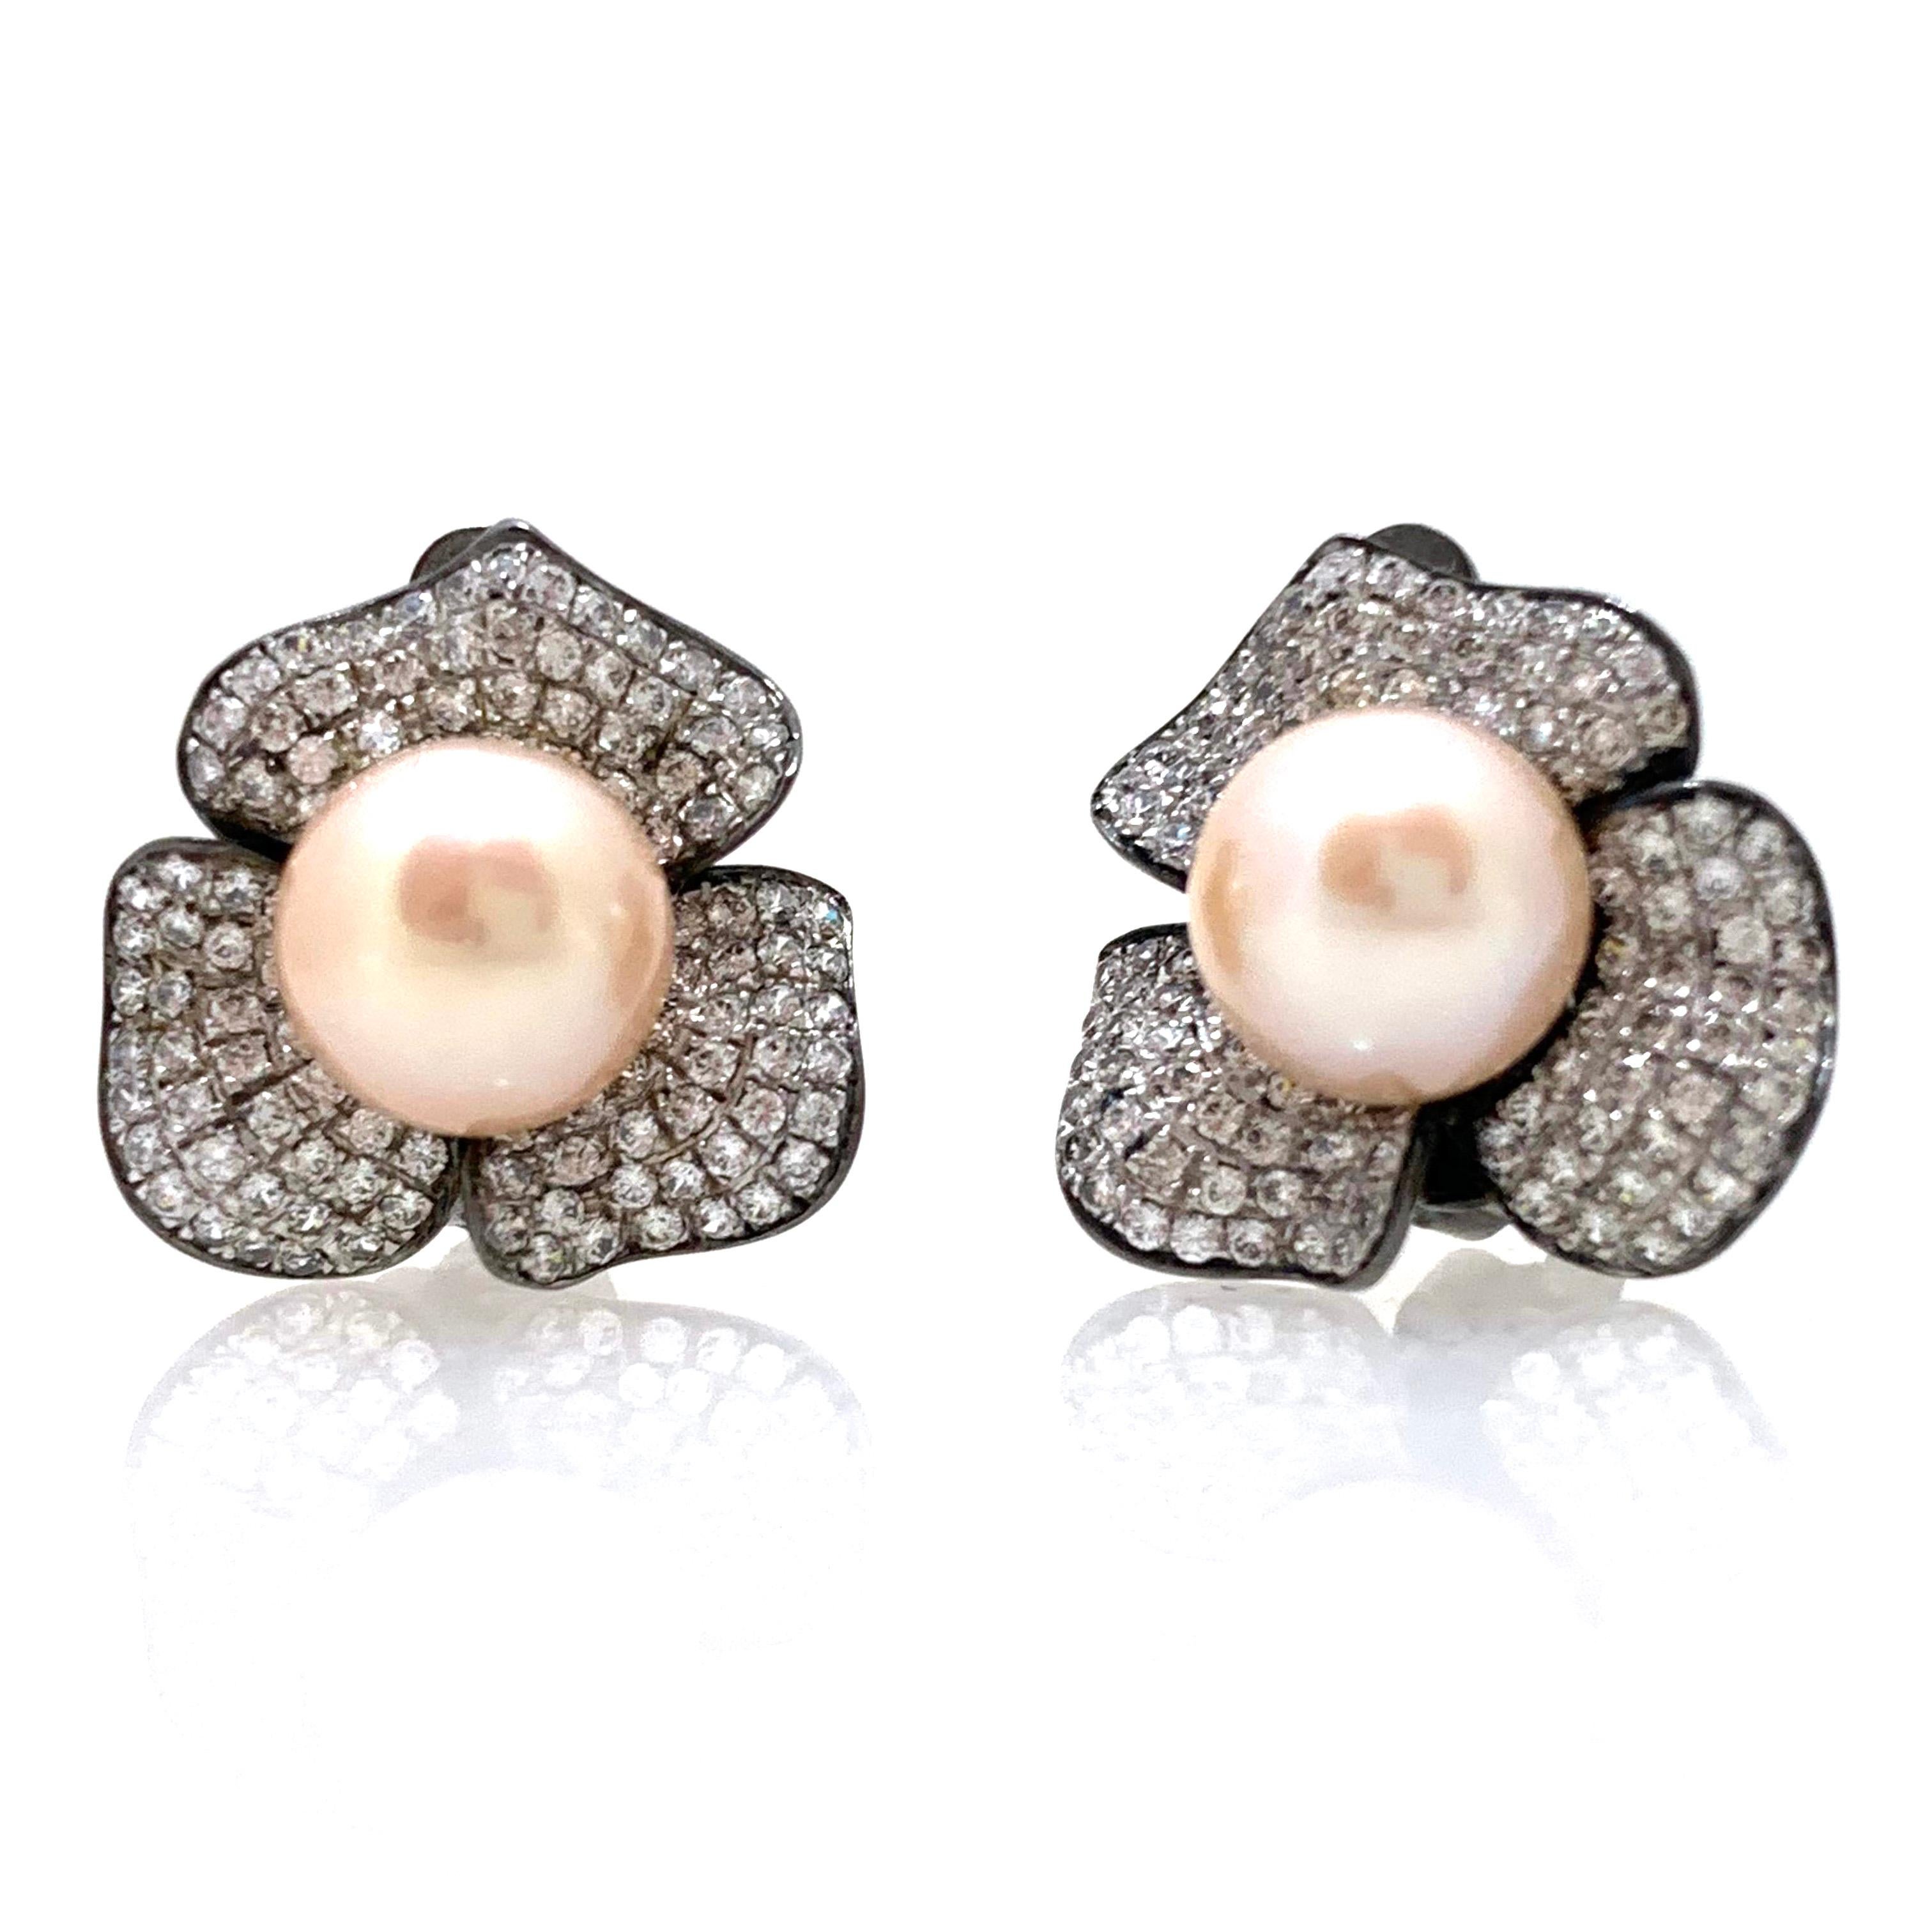 Stunning 9mm Akoya Pearl and Pave Simulated Diamond Flower Sterling Silver Earrings. 

This estate-style earrings features two 9mm perfectly round natural pink-peach color Japanese Akoya pearls on the center. The petals contain 226 round brilliant